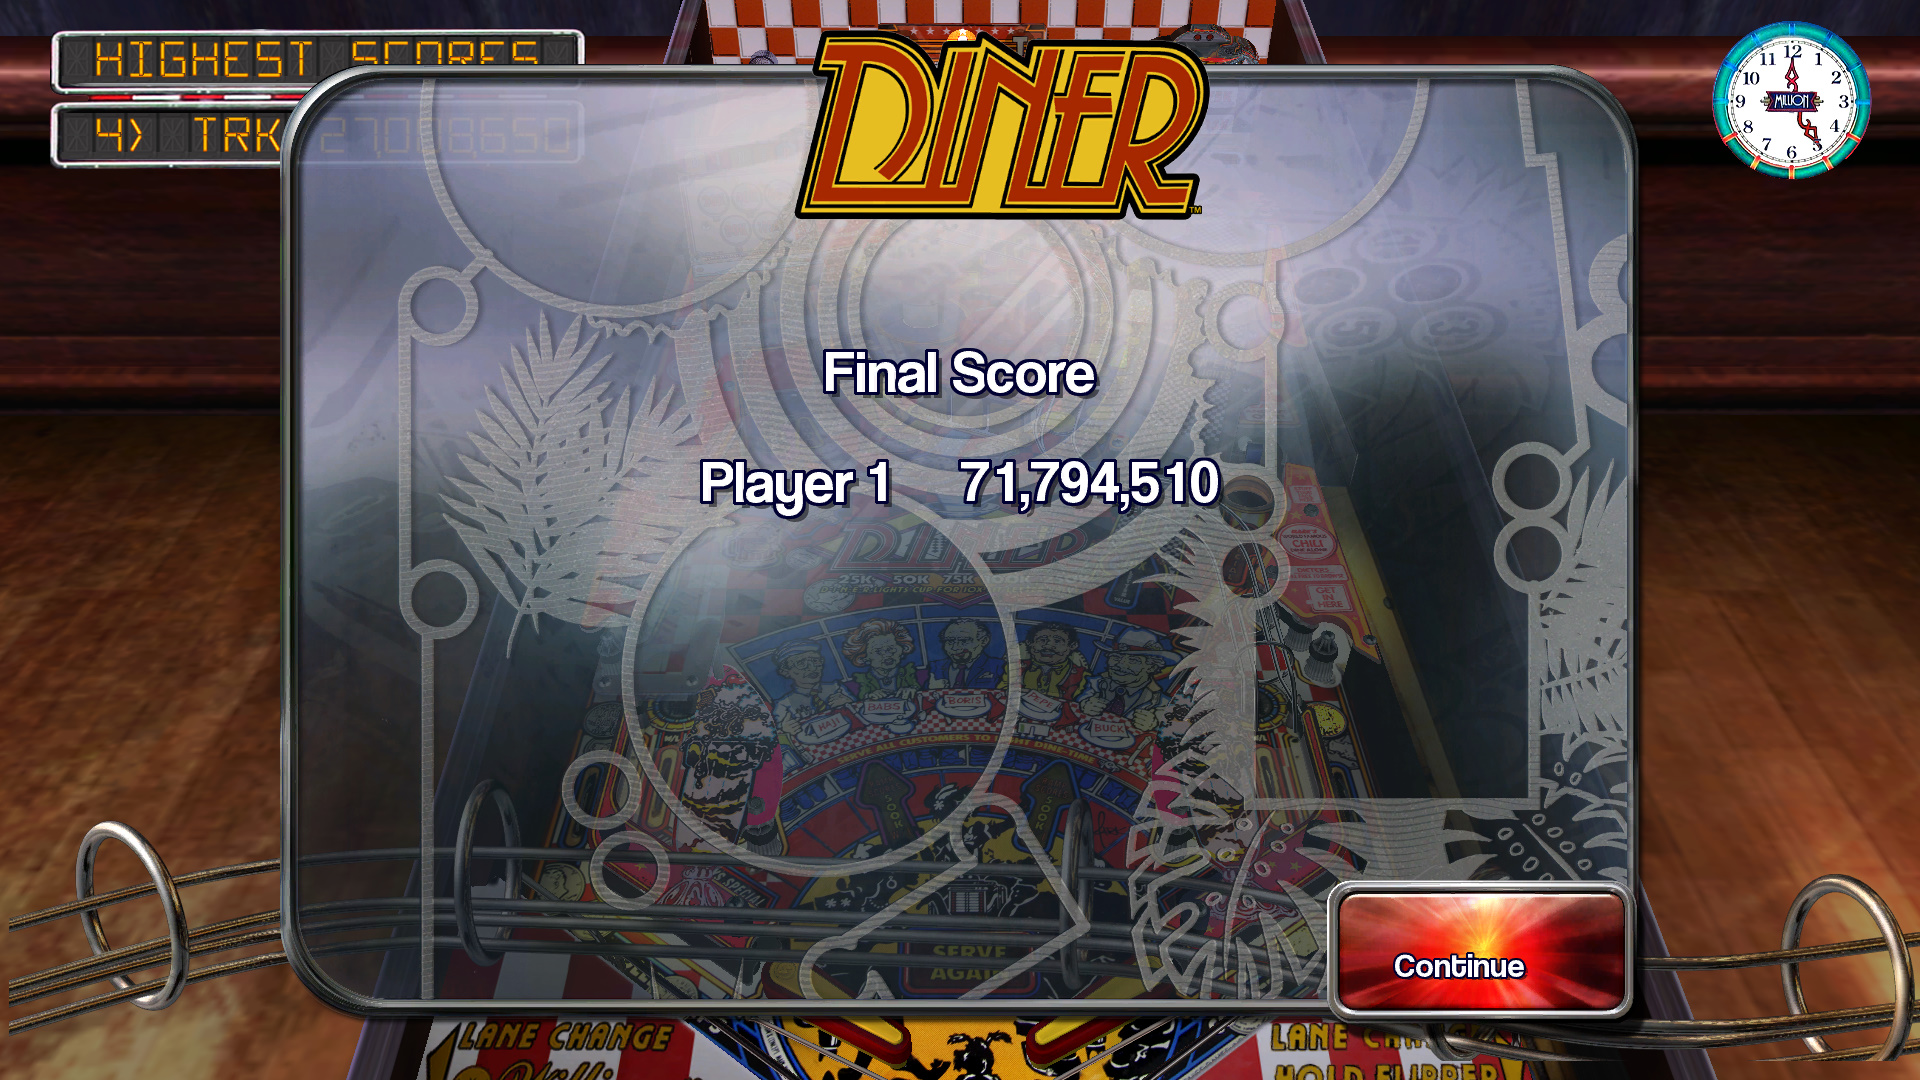 TheTrickster: Pinball Arcade: Diner (PC) 71,794,510 points on 2015-10-12 04:17:28